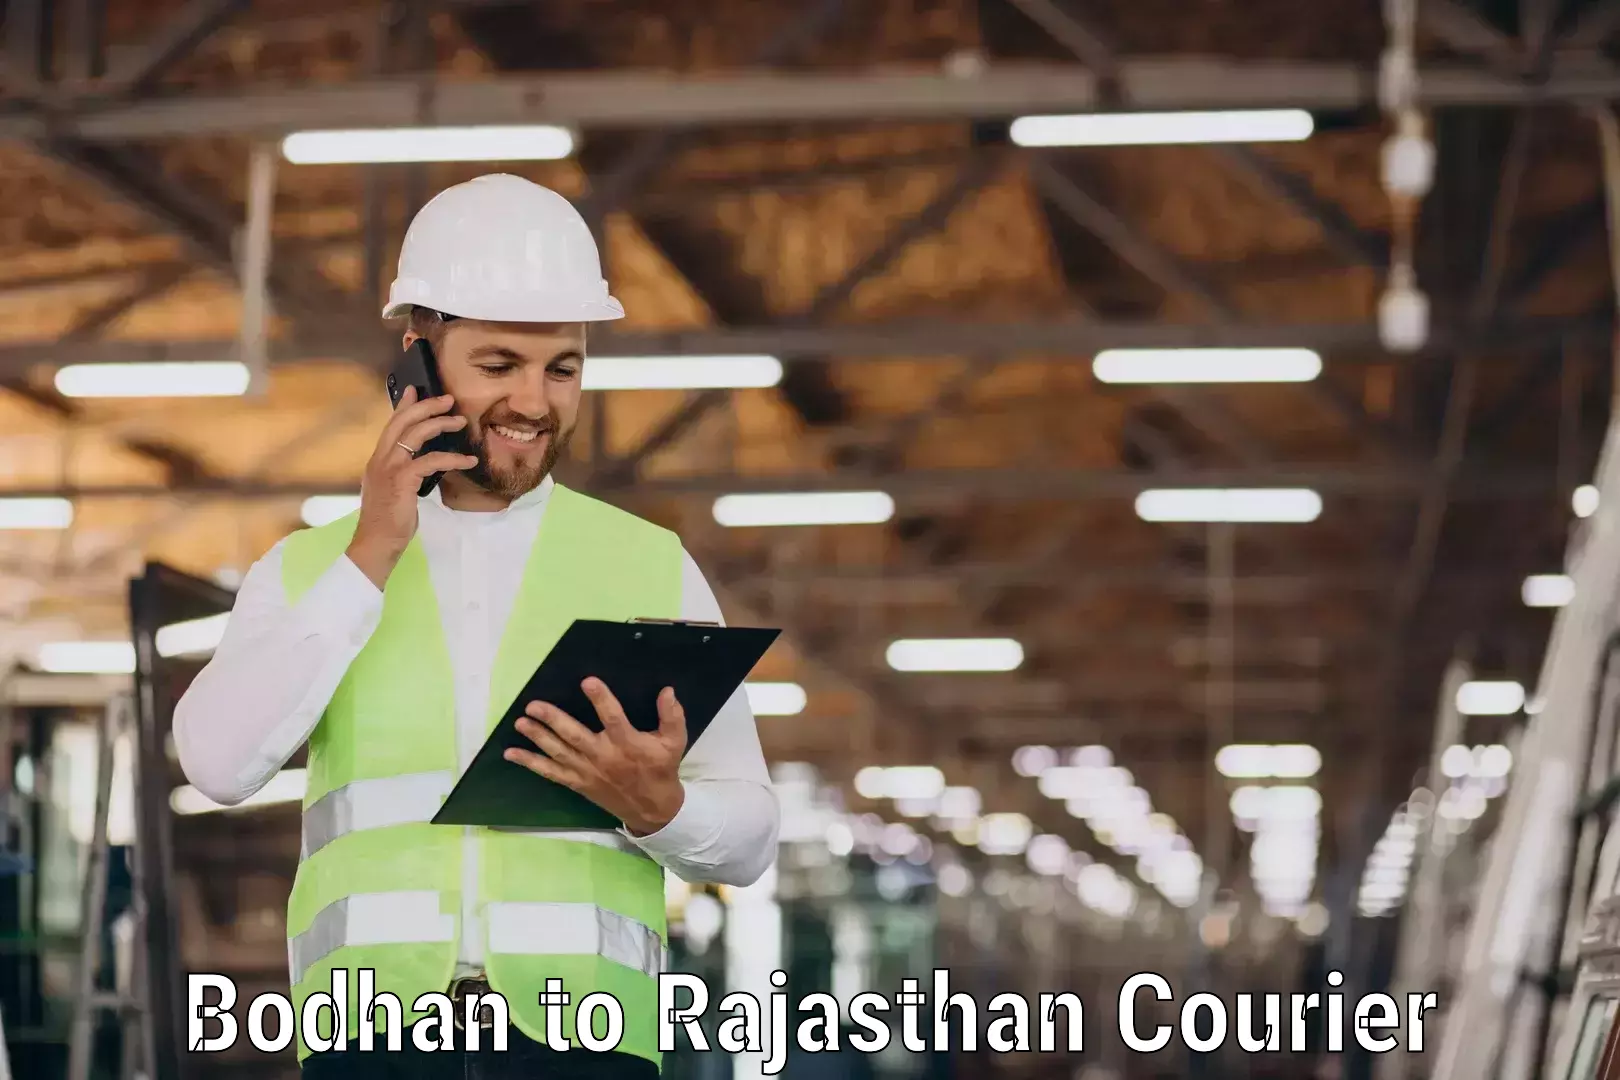 Courier dispatch services Bodhan to Chittorgarh